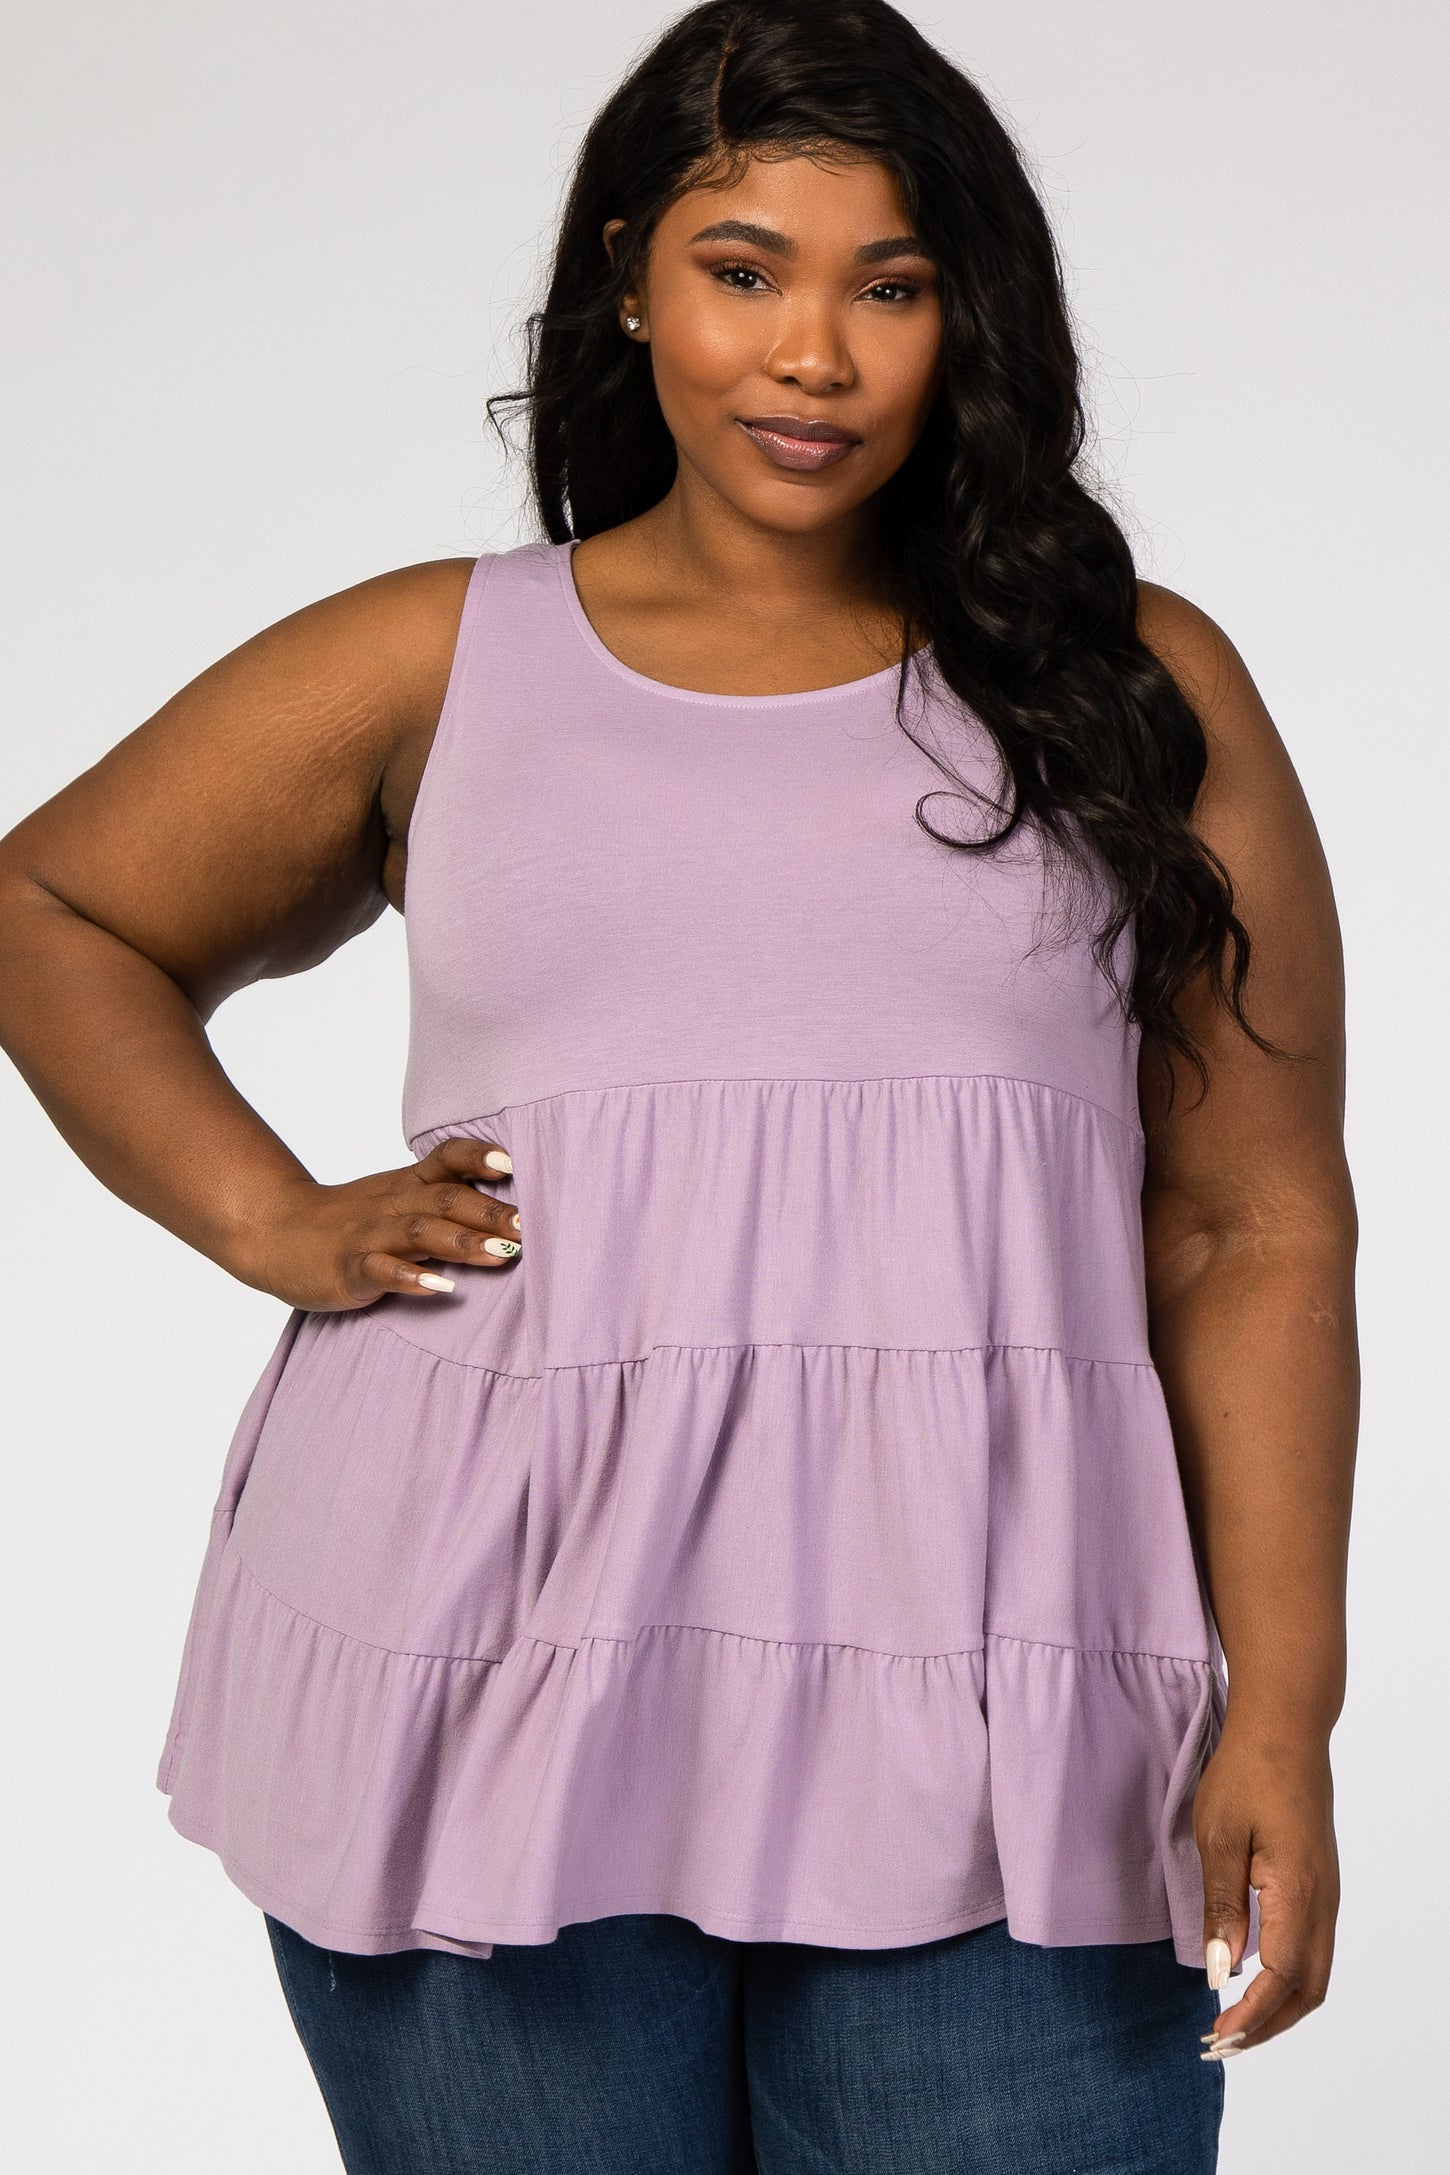 Lavender Tiered Sleeveless Plus Top